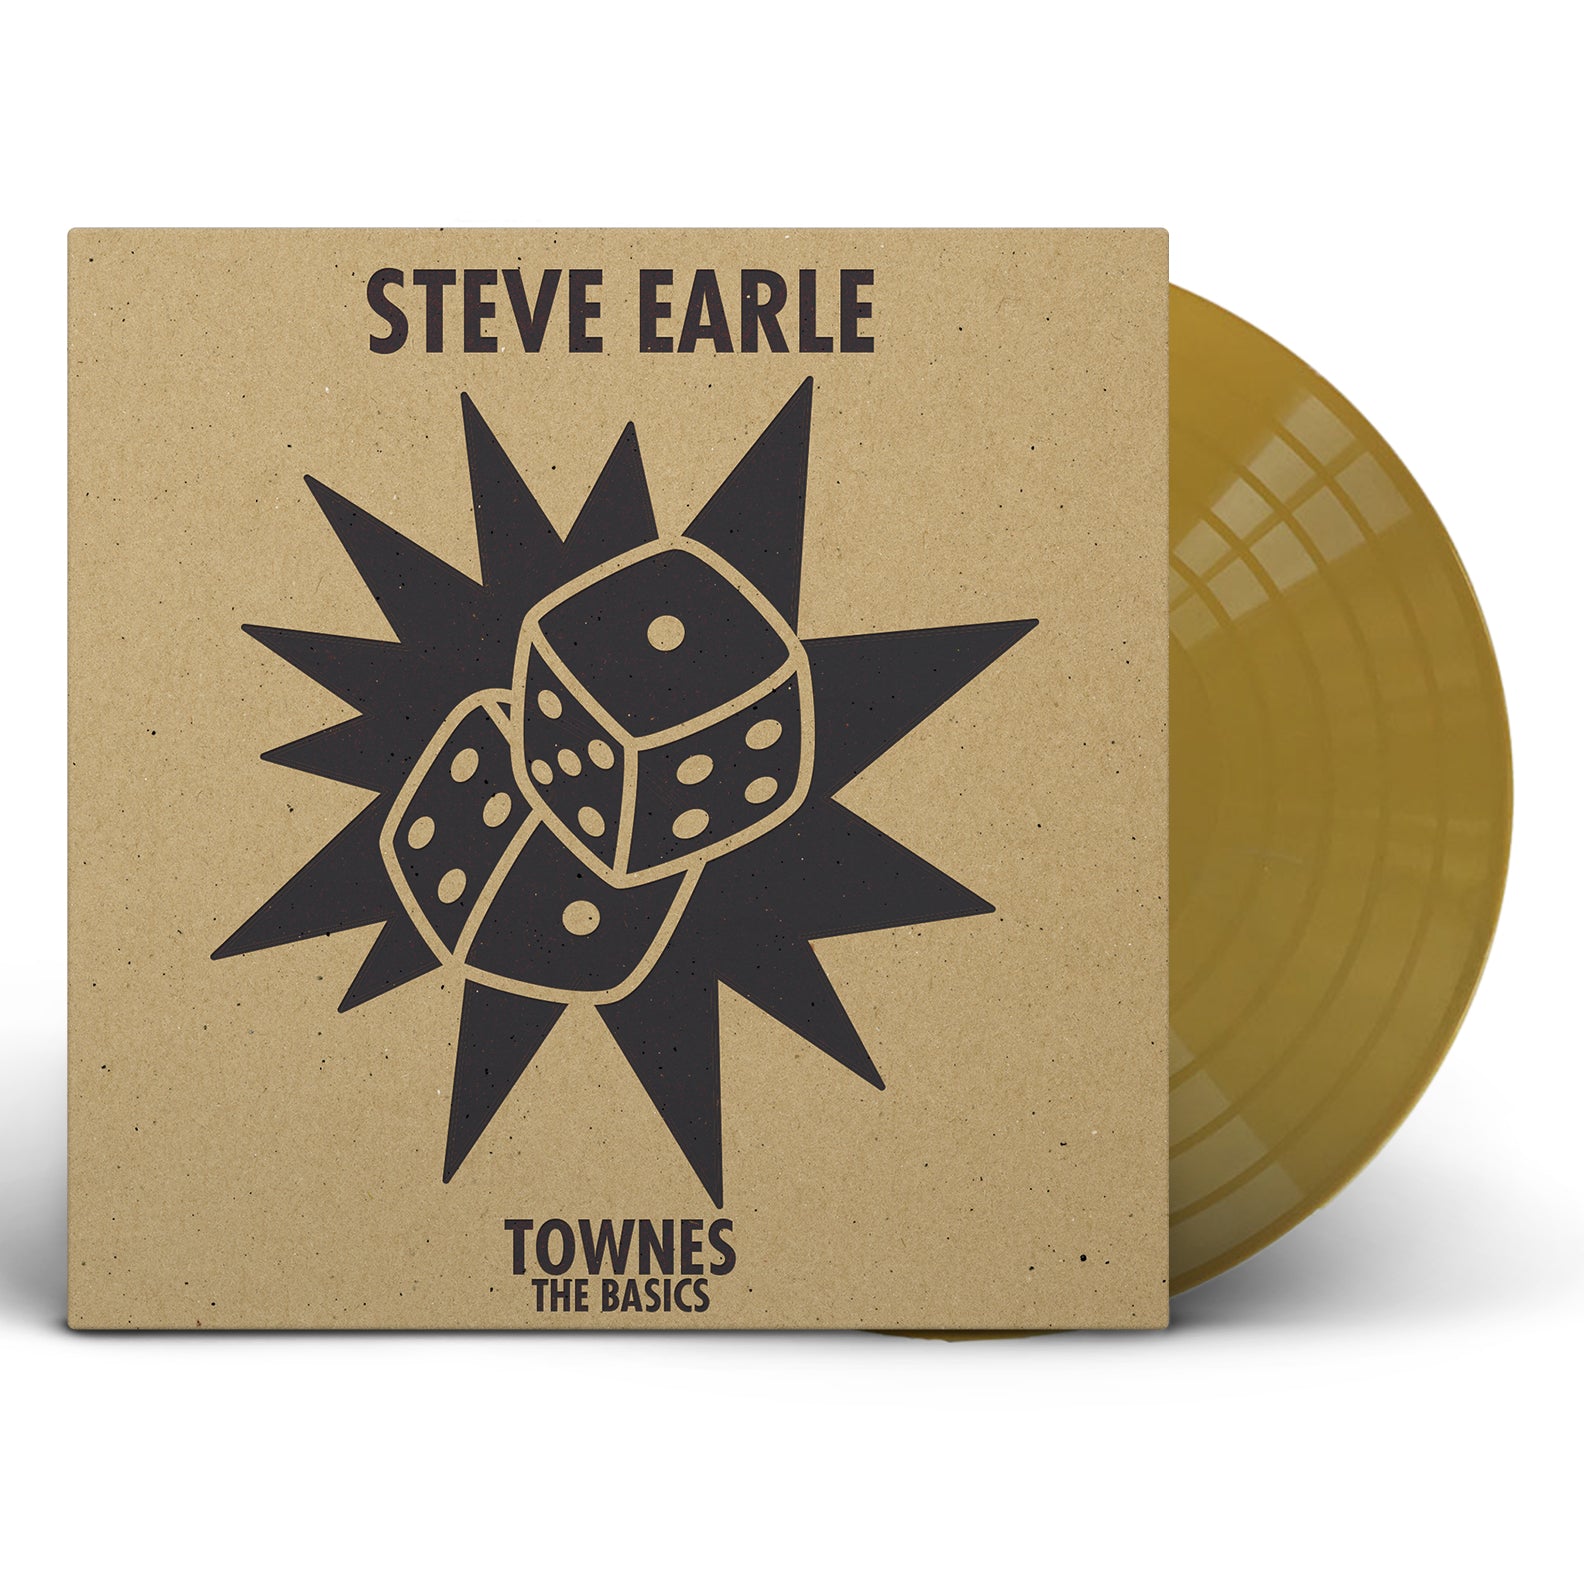 Steve Earle - Townes: The Basics [Limited Edition Color Vinyl]